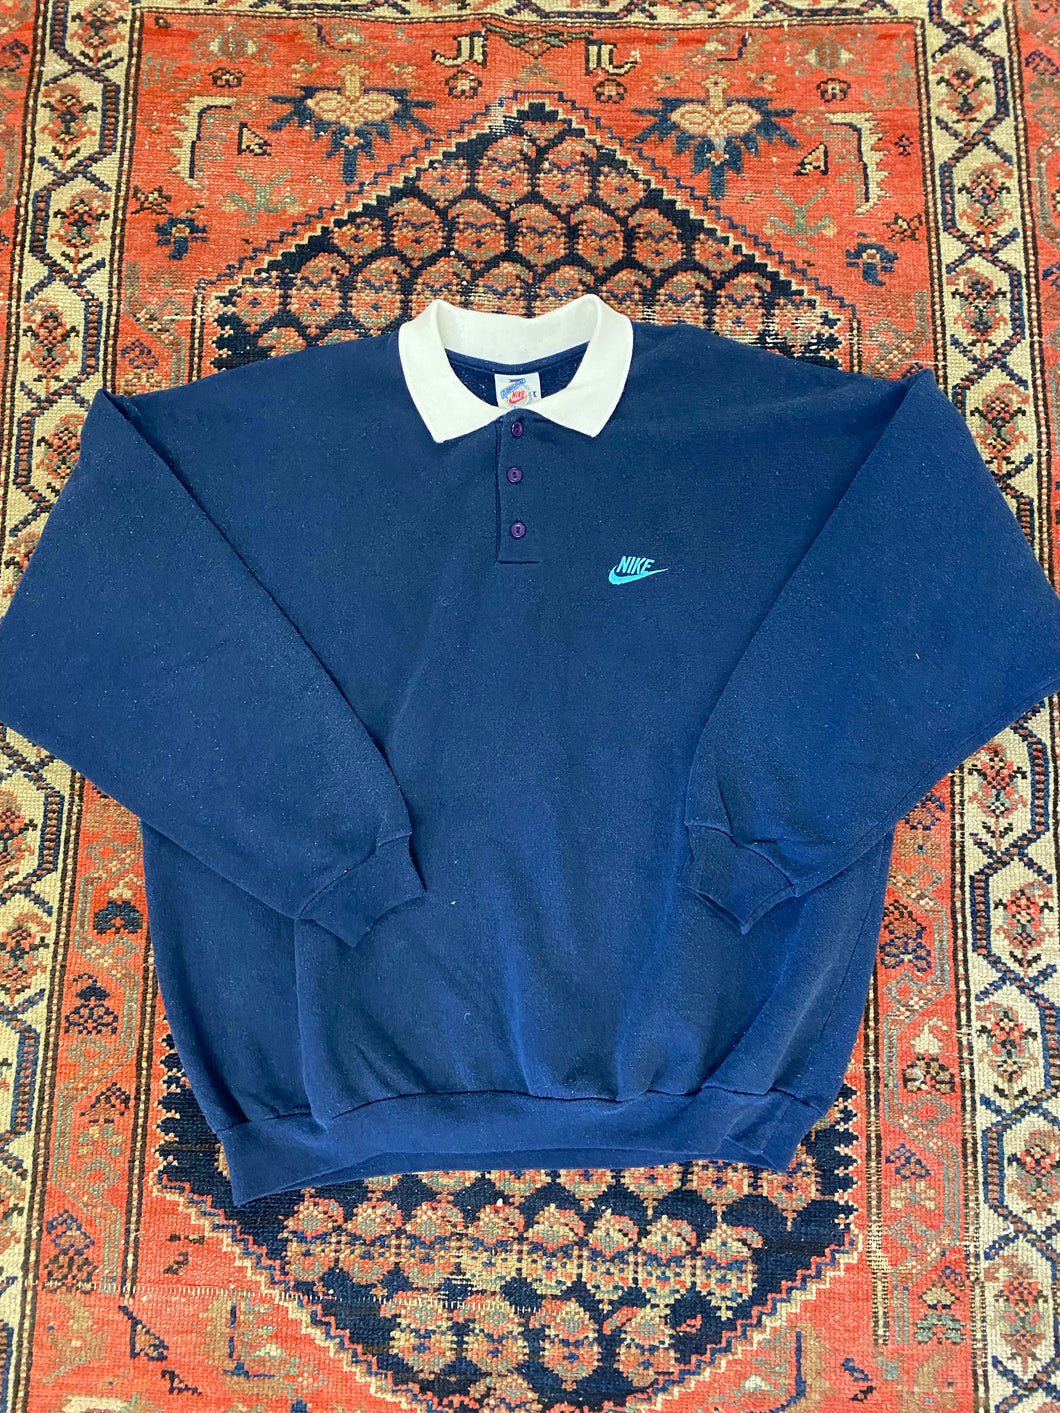 90s Nike Rugby Polo - L